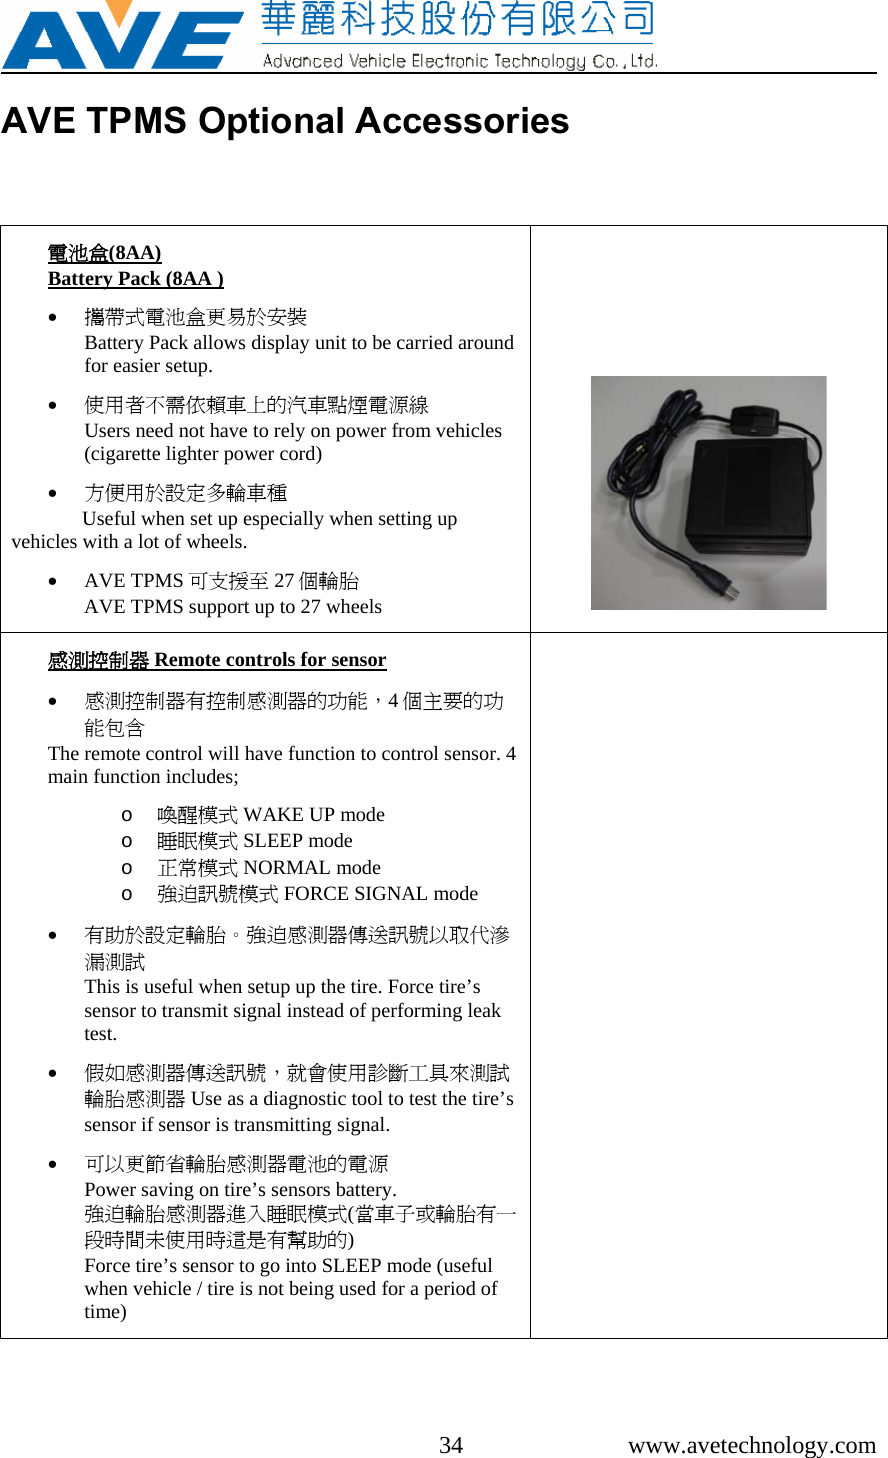     34 www.avetechnology.com AVE TPMS Optional Accessories  電池盒(8AA)  Battery Pack (8AA )  • 攜帶式電池盒更易於安裝                                 Battery Pack allows display unit to be carried around for easier setup.   • 使用者不需依賴車上的汽車點煙電源線         Users need not have to rely on power from vehicles (cigarette lighter power cord)  • 方便用於設定多輪車種 Useful when set up especially when setting up vehicles with a lot of wheels.  • AVE TPMS 可支援至 27 個輪胎                                 AVE TPMS support up to 27 wheels     感測控制器 Remote controls for sensor  • 感測控制器有控制感測器的功能，4個主要的功能包含 The remote control will have function to control sensor. 4 main function includes;  o 喚醒模式 WAKE UP mode  o 睡眠模式 SLEEP mode o 正常模式 NORMAL mode o 強迫訊號模式 FORCE SIGNAL mode  • 有助於設定輪胎。強迫感測器傳送訊號以取代滲漏測試                                                                   This is useful when setup up the tire. Force tire’s sensor to transmit signal instead of performing leak test.   • 假如感測器傳送訊號，就會使用診斷工具來測試輪胎感測器 Use as a diagnostic tool to test the tire’s sensor if sensor is transmitting signal.  • 可以更節省輪胎感測器電池的電源                     Power saving on tire’s sensors battery. 強迫輪胎感測器進入睡眠模式(當車子或輪胎有一段時間未使用時這是有幫助的)                            Force tire’s sensor to go into SLEEP mode (useful when vehicle / tire is not being used for a period of time)   